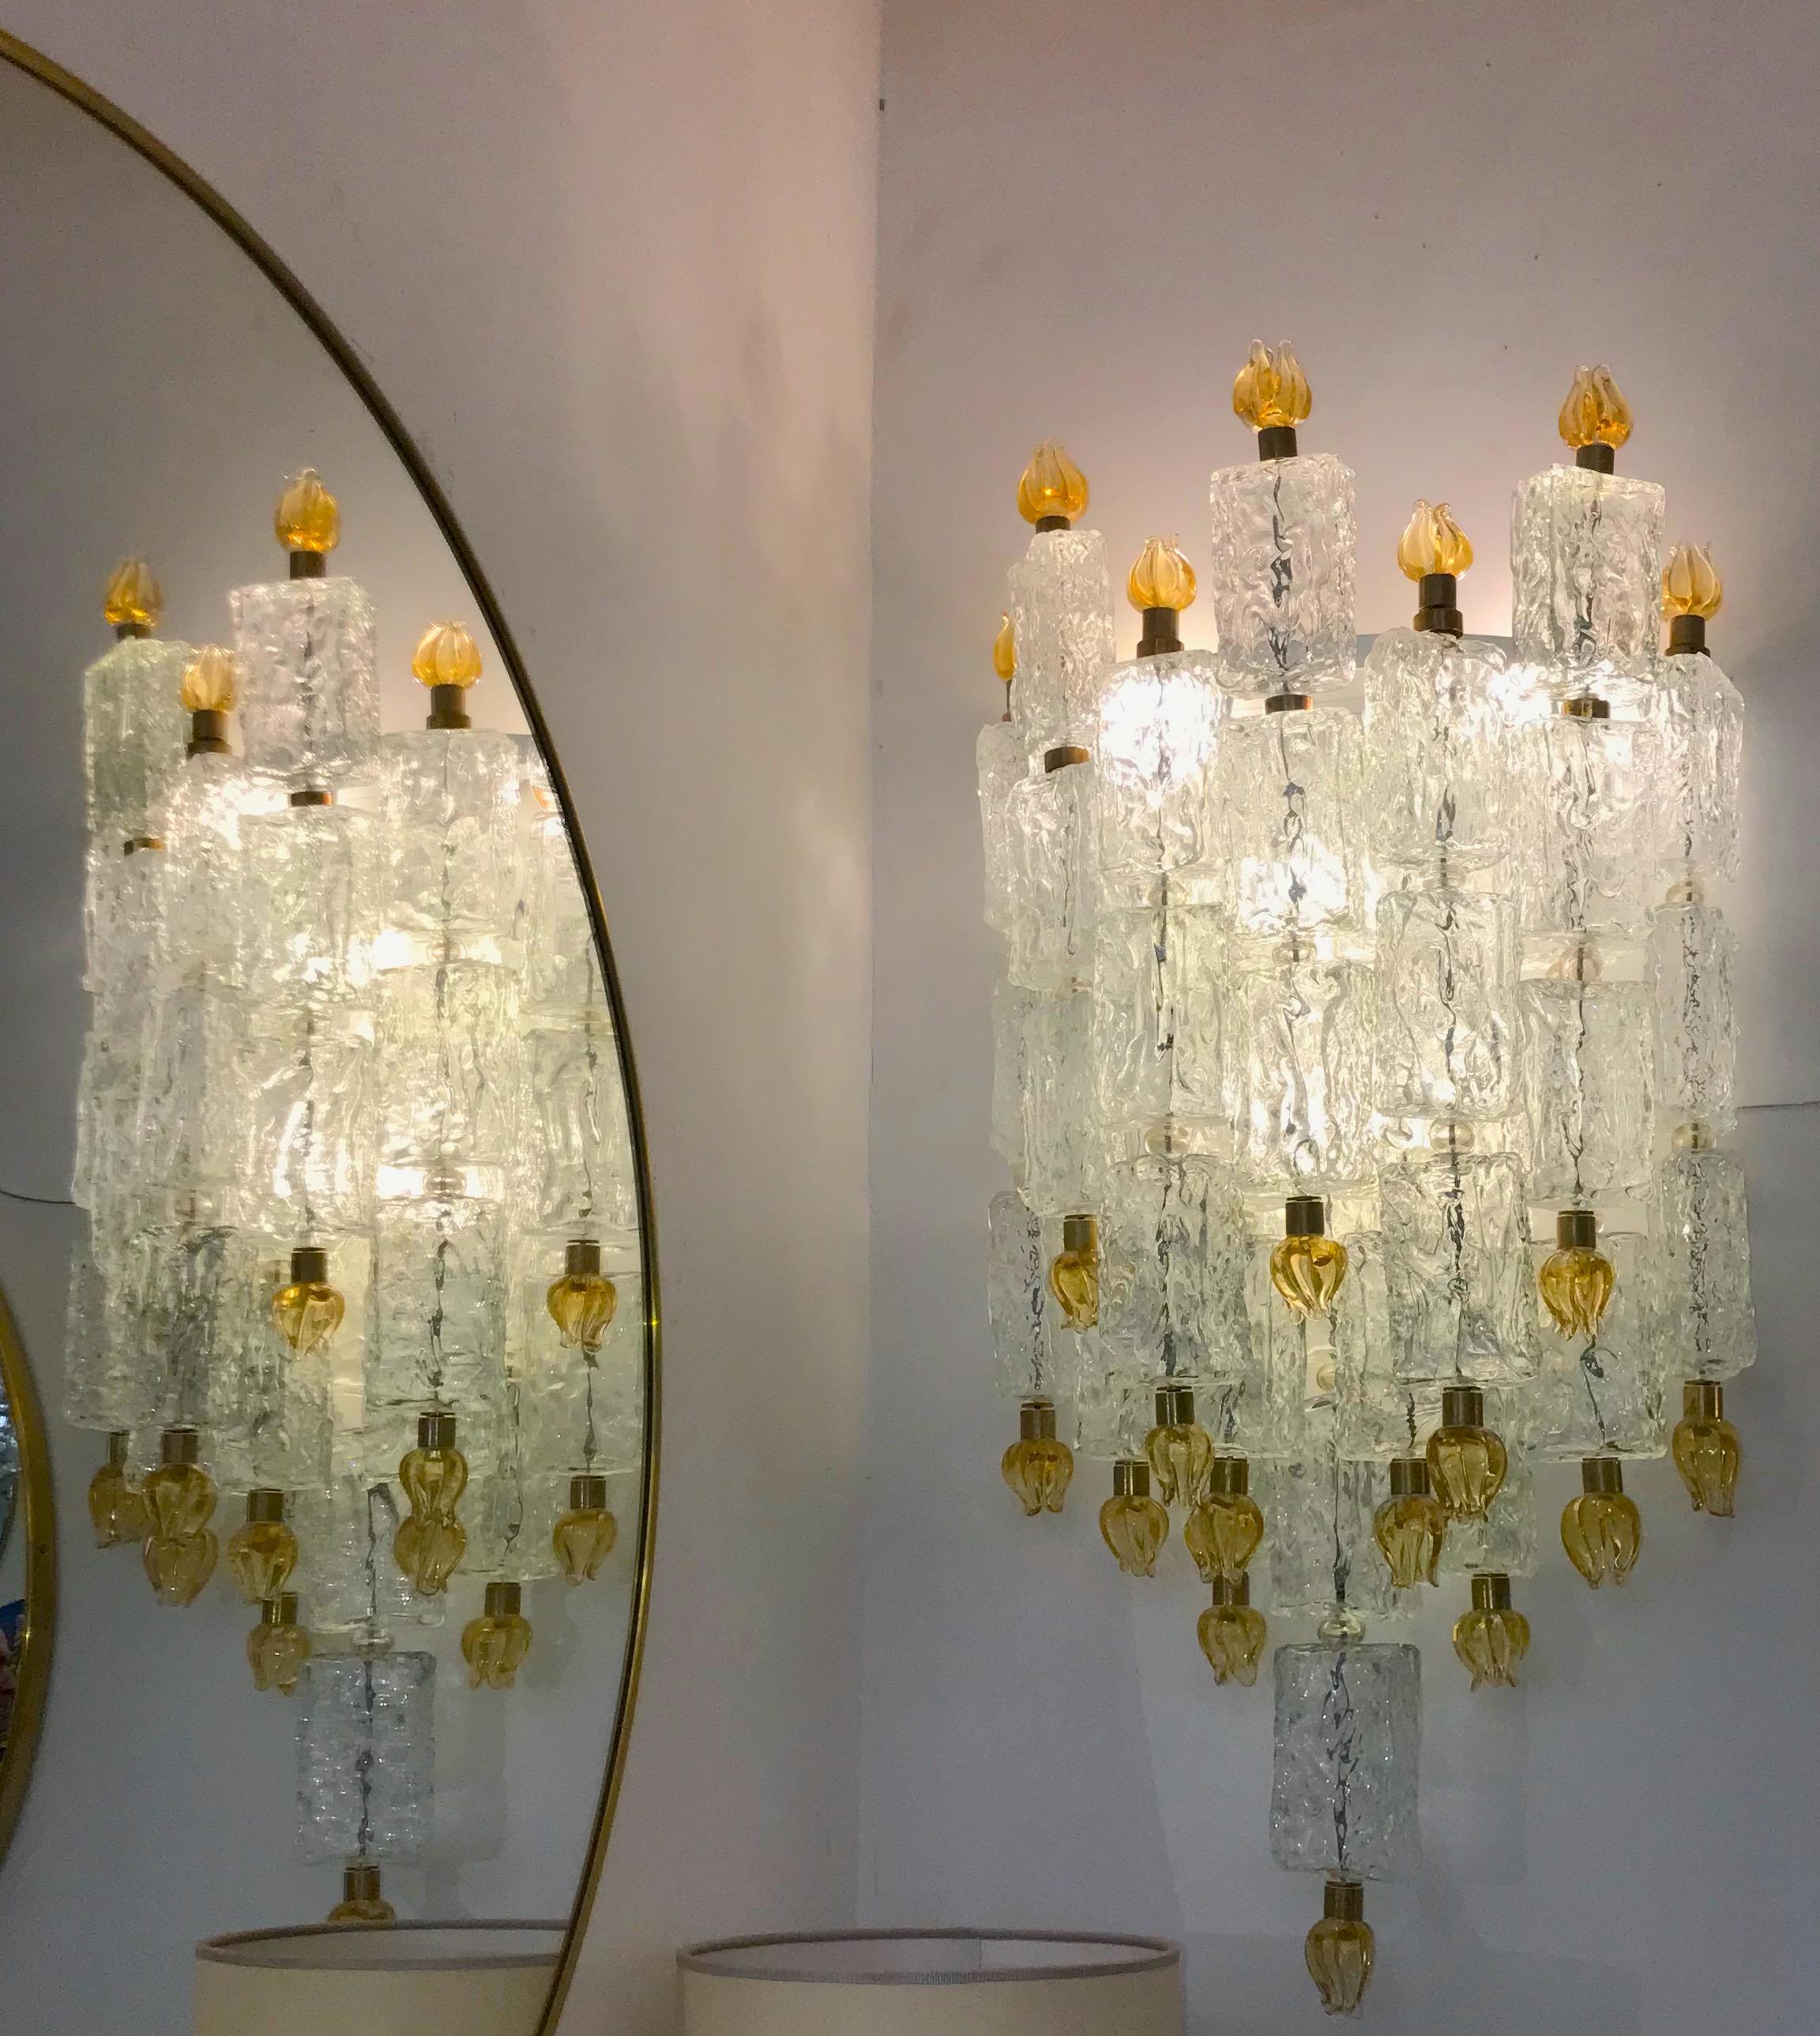 Pair of Barovier & Toso Glass Blocks with Gold Tulip Sconces, 1940 For Sale 1